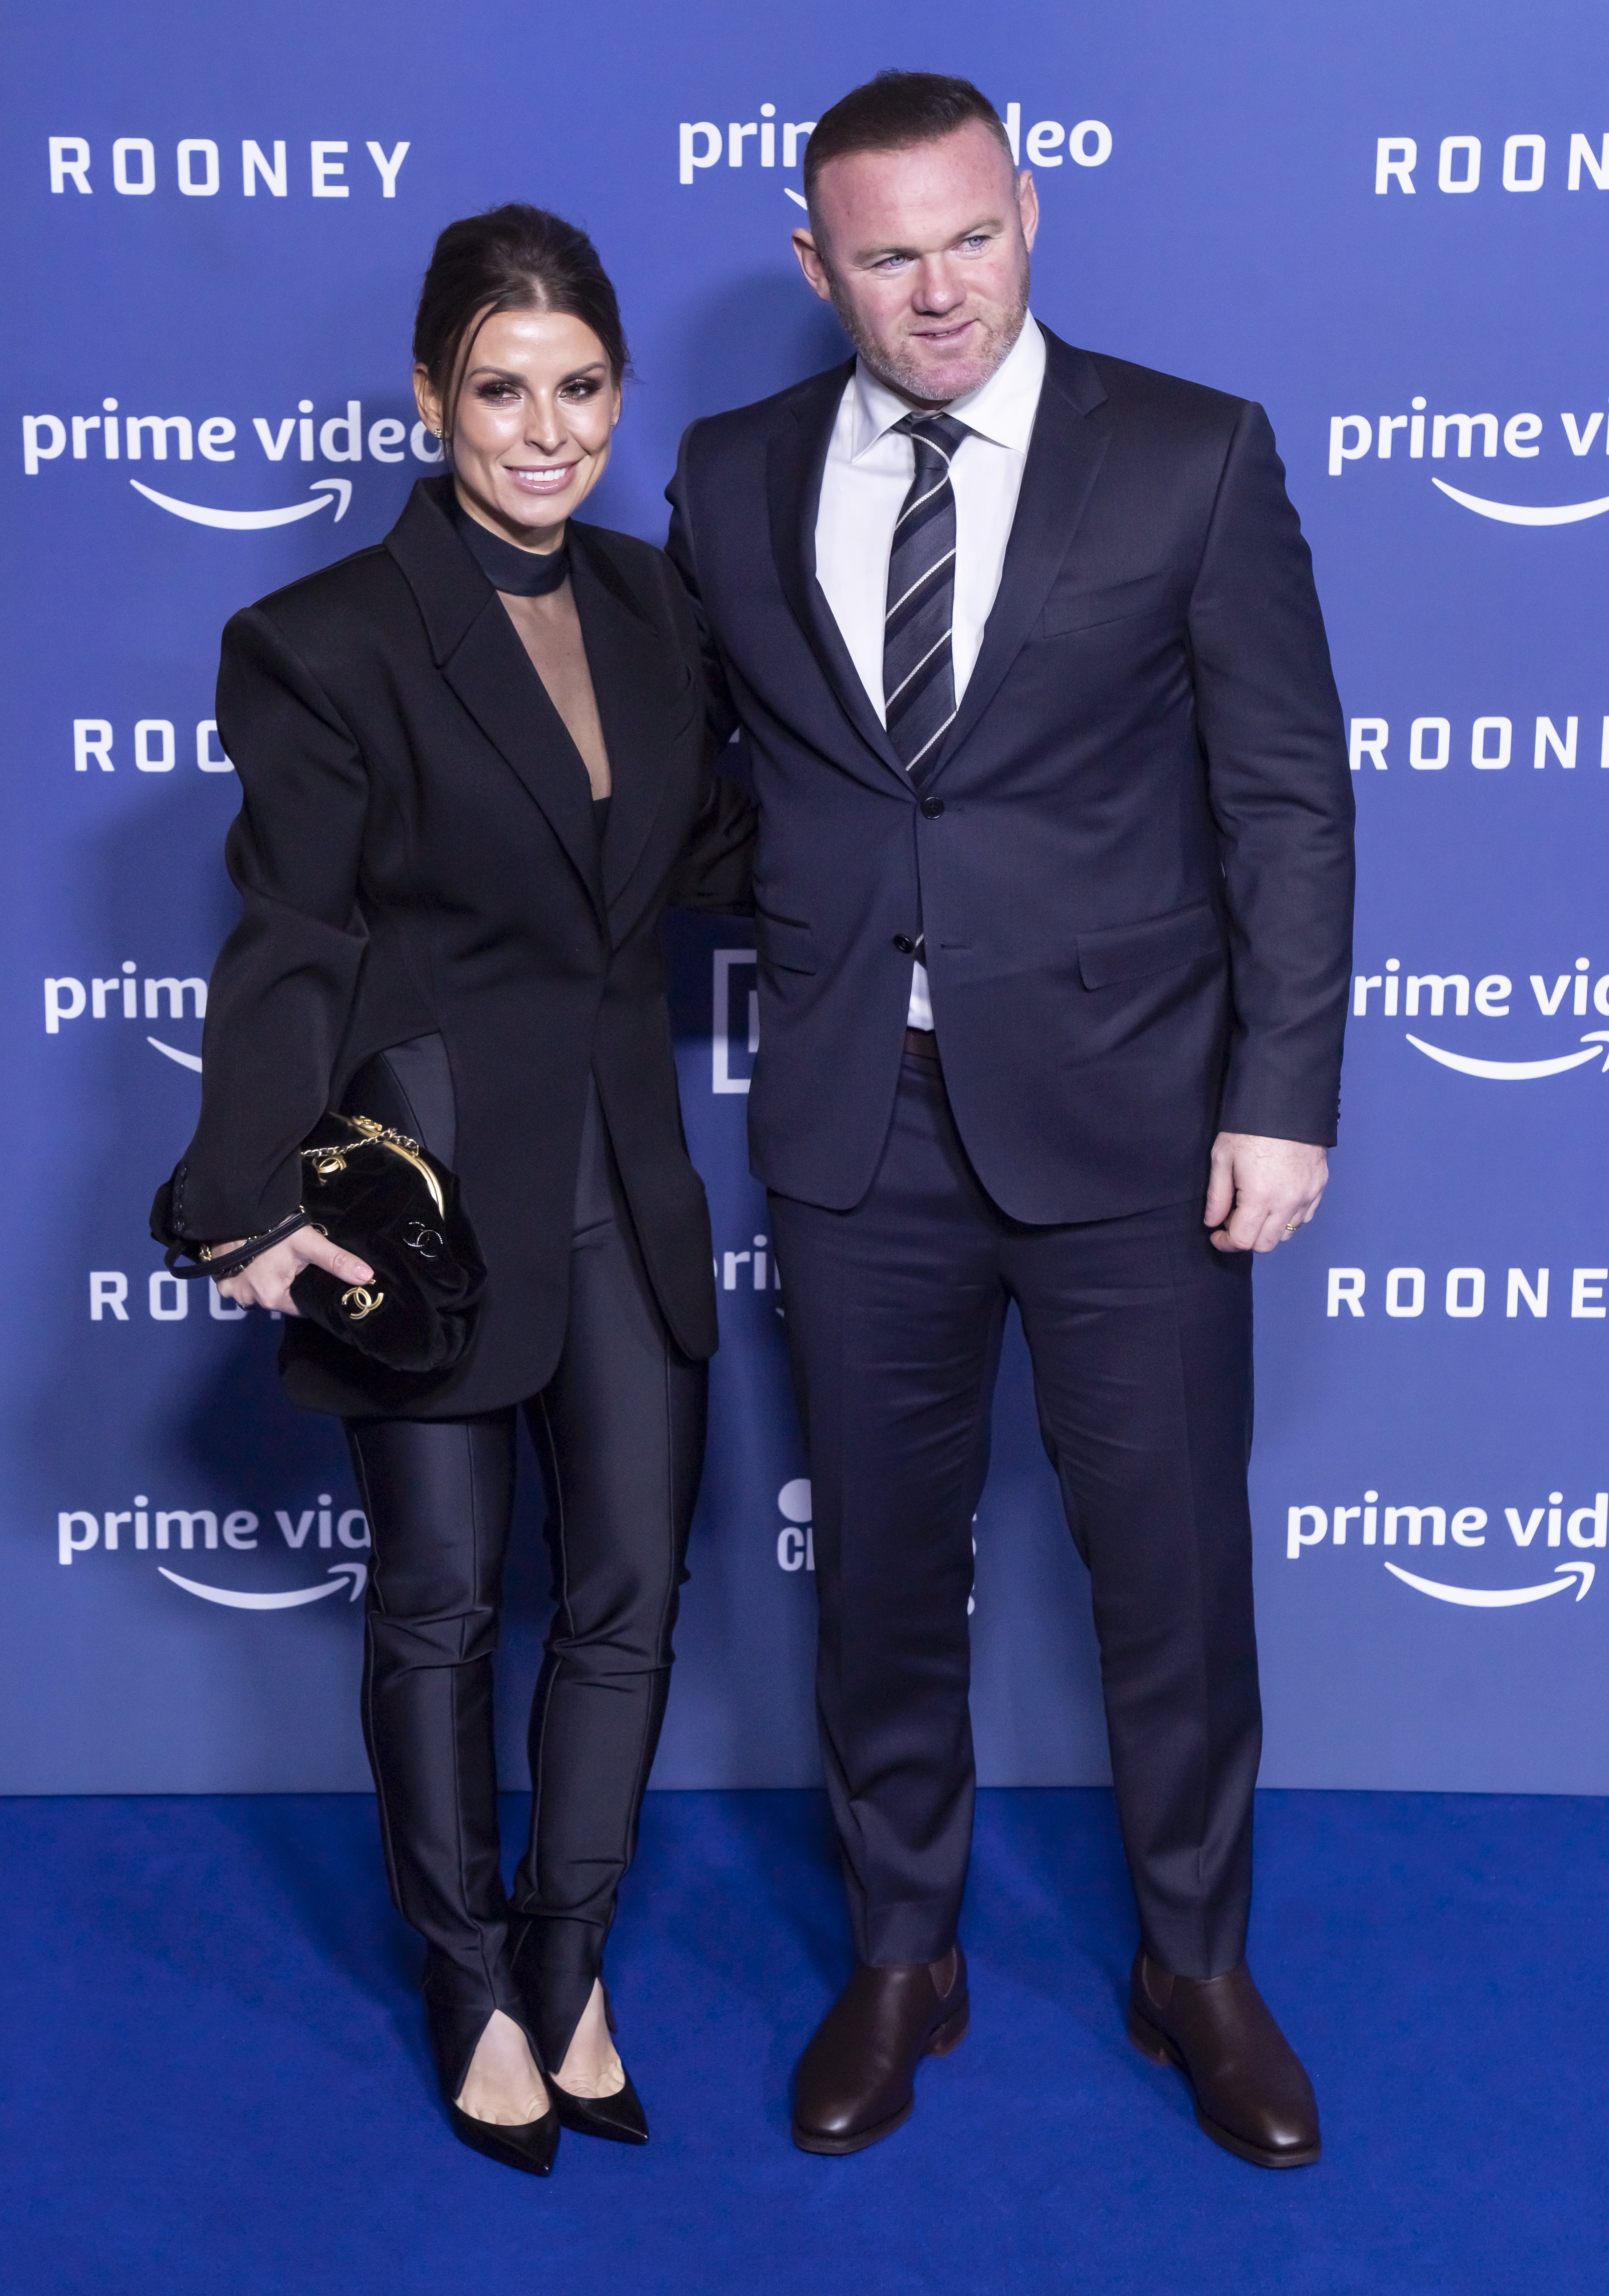 Ex-England football player Wayne Rooney with his wife Colleen at the premiere of their recent Amazon documentary